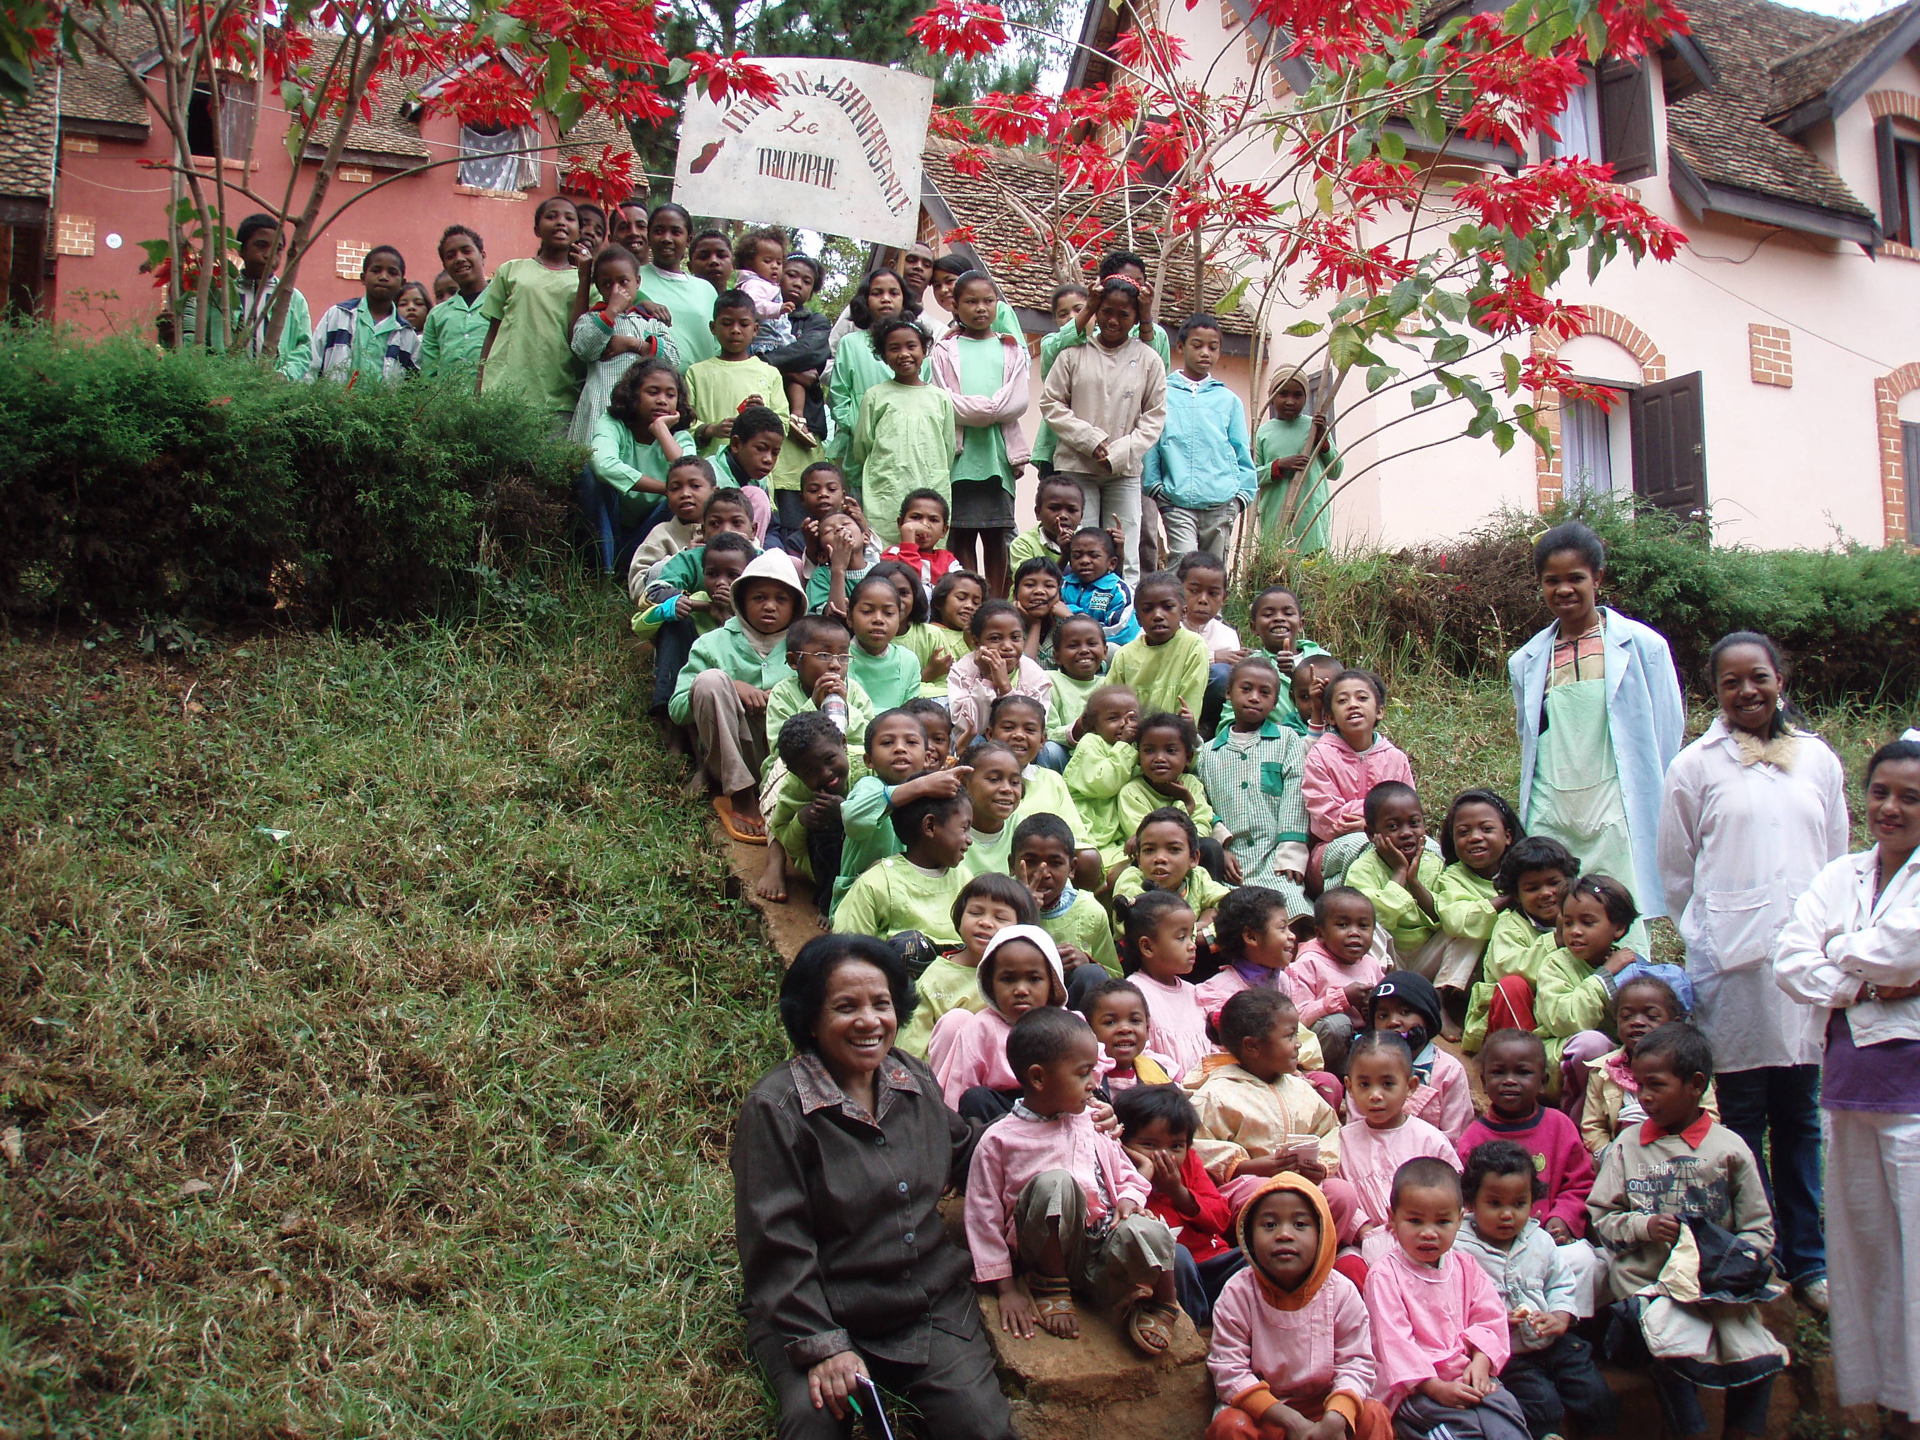 Full group photo of staff and children in Le Triomphe's Children's orphanage in Madagascar